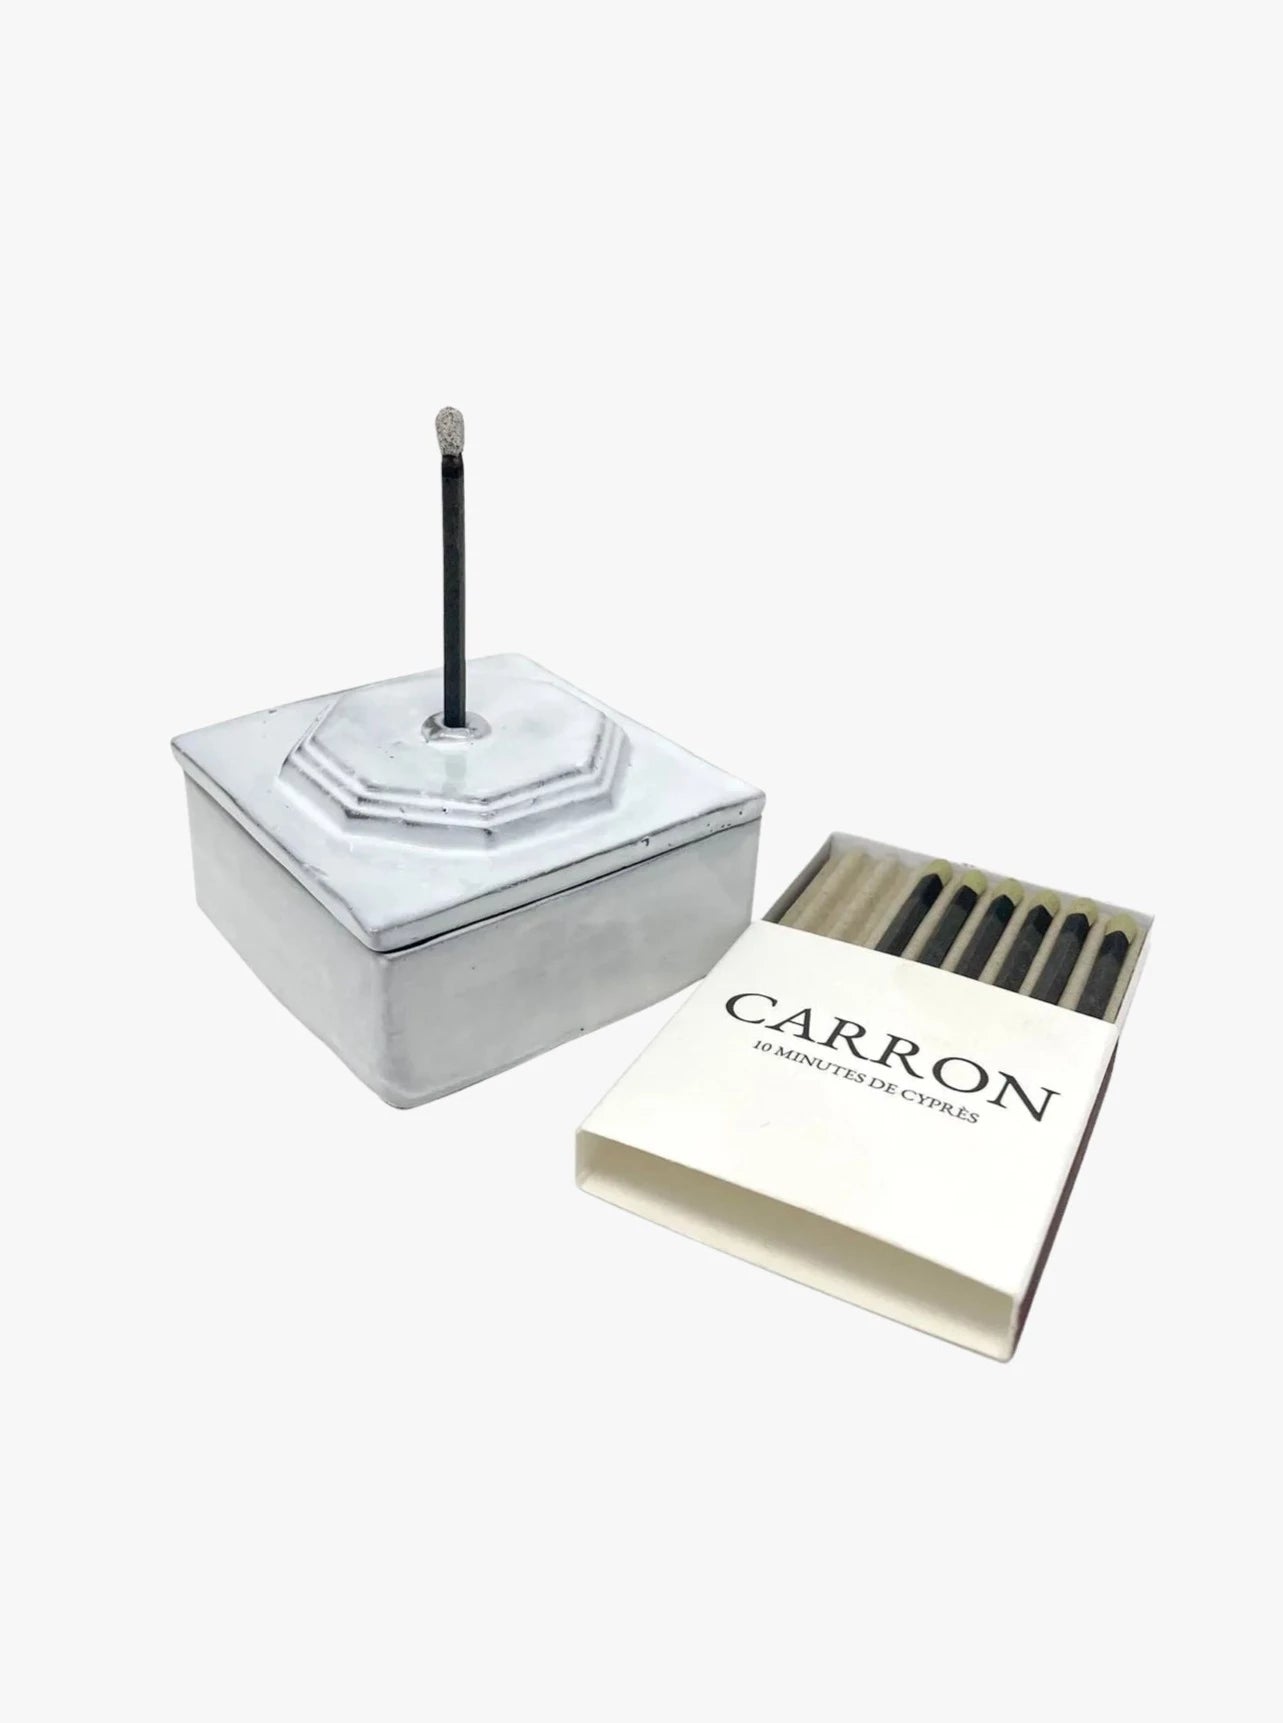 Incense Holder Incense Matches With Censer Box Carron